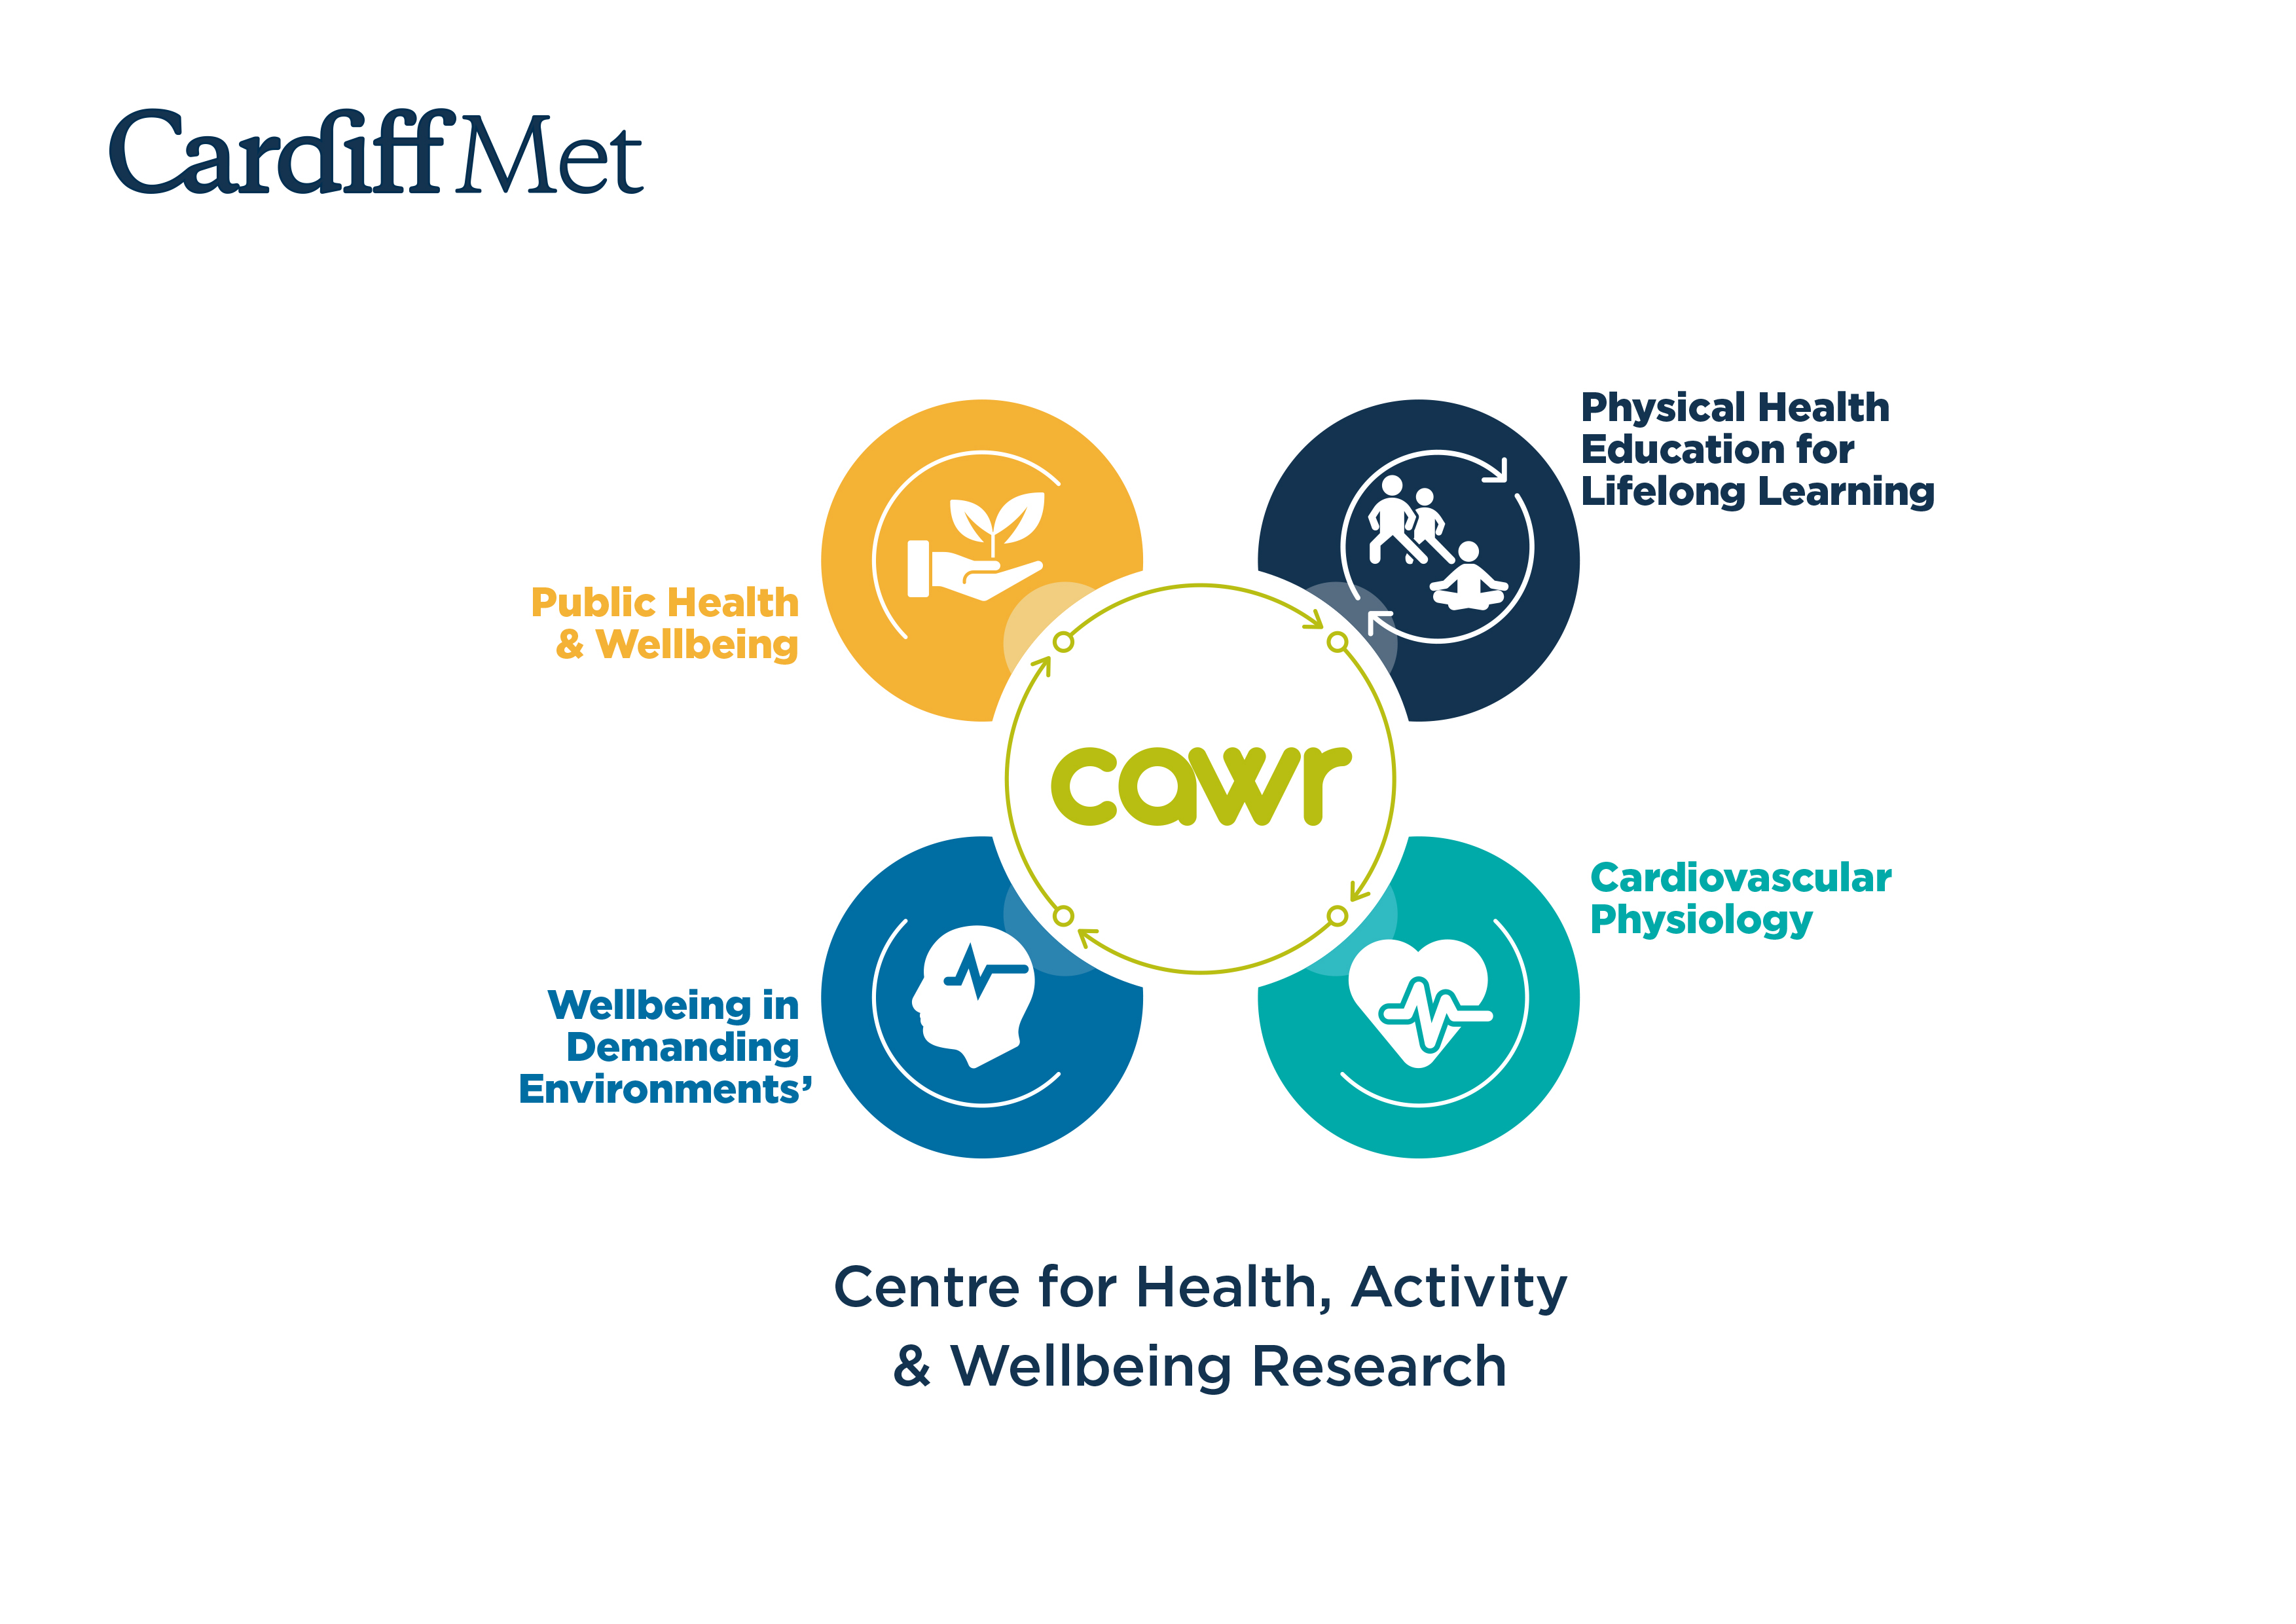 Cardiff Met - Centre for Health, Activity and Wellbeing - Areas of Expertise